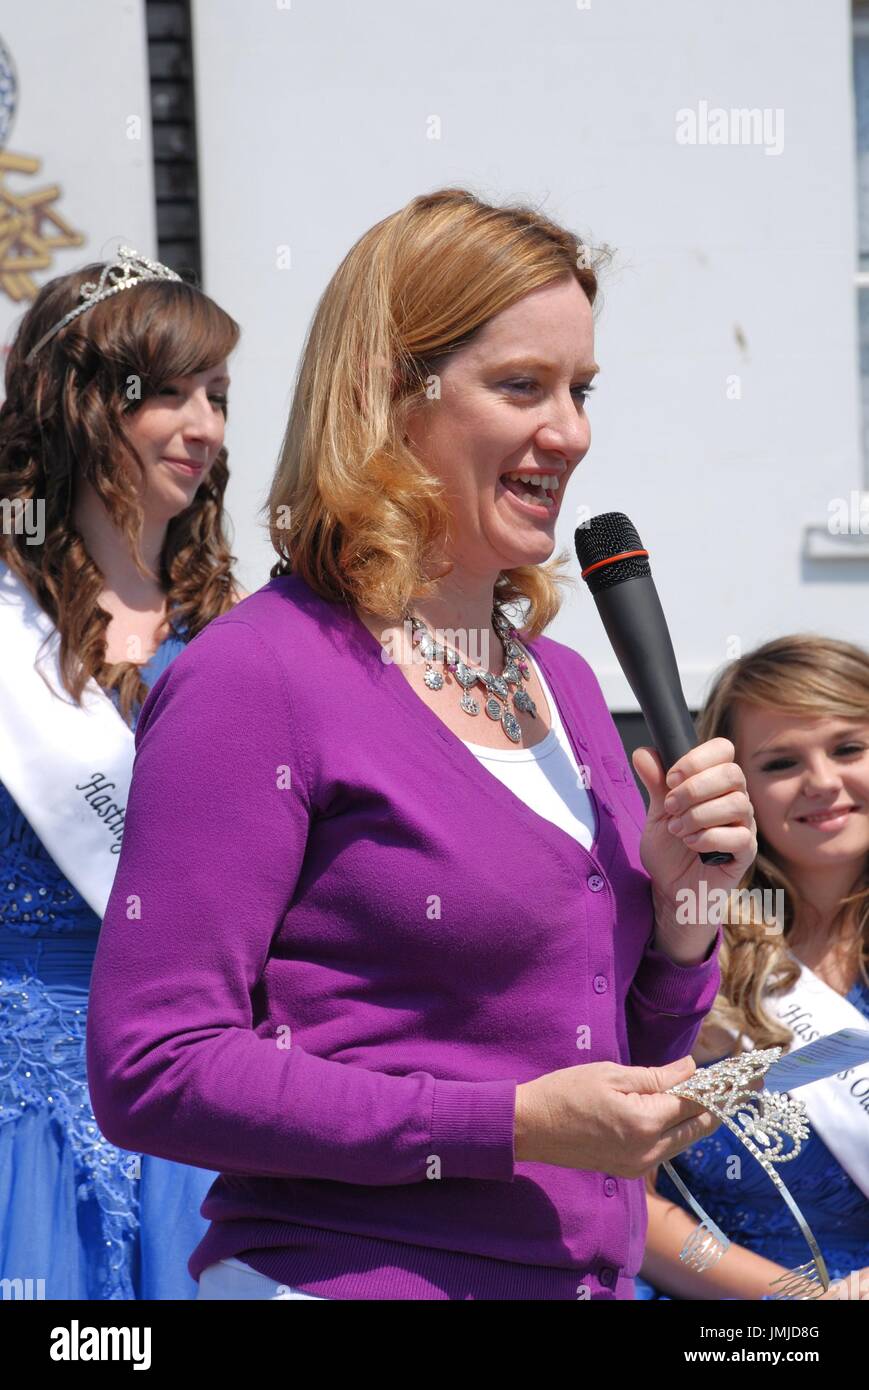 Amber Rudd, Conservative M.P. for Hastings and Rye, speaks at the opening of the annual Old Town Carnival in Hastings, England on July 30, 2011. Stock Photo